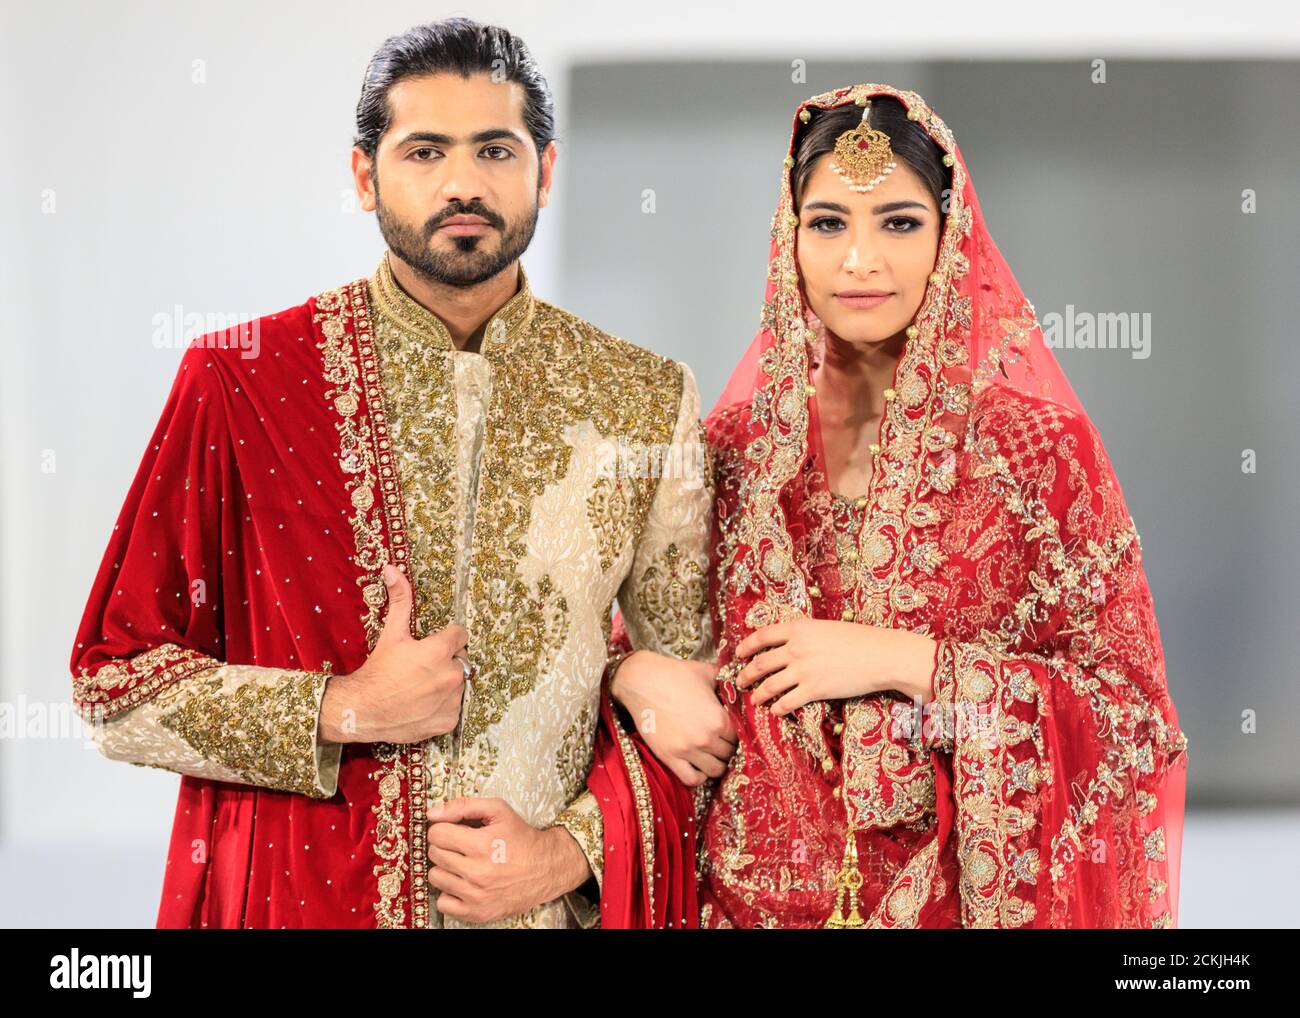 Model bride and groom, Asian wedding dress bridal wear, gown by Sache by Asif, National Asian Wedding Show fashion runway, London Stock Photo